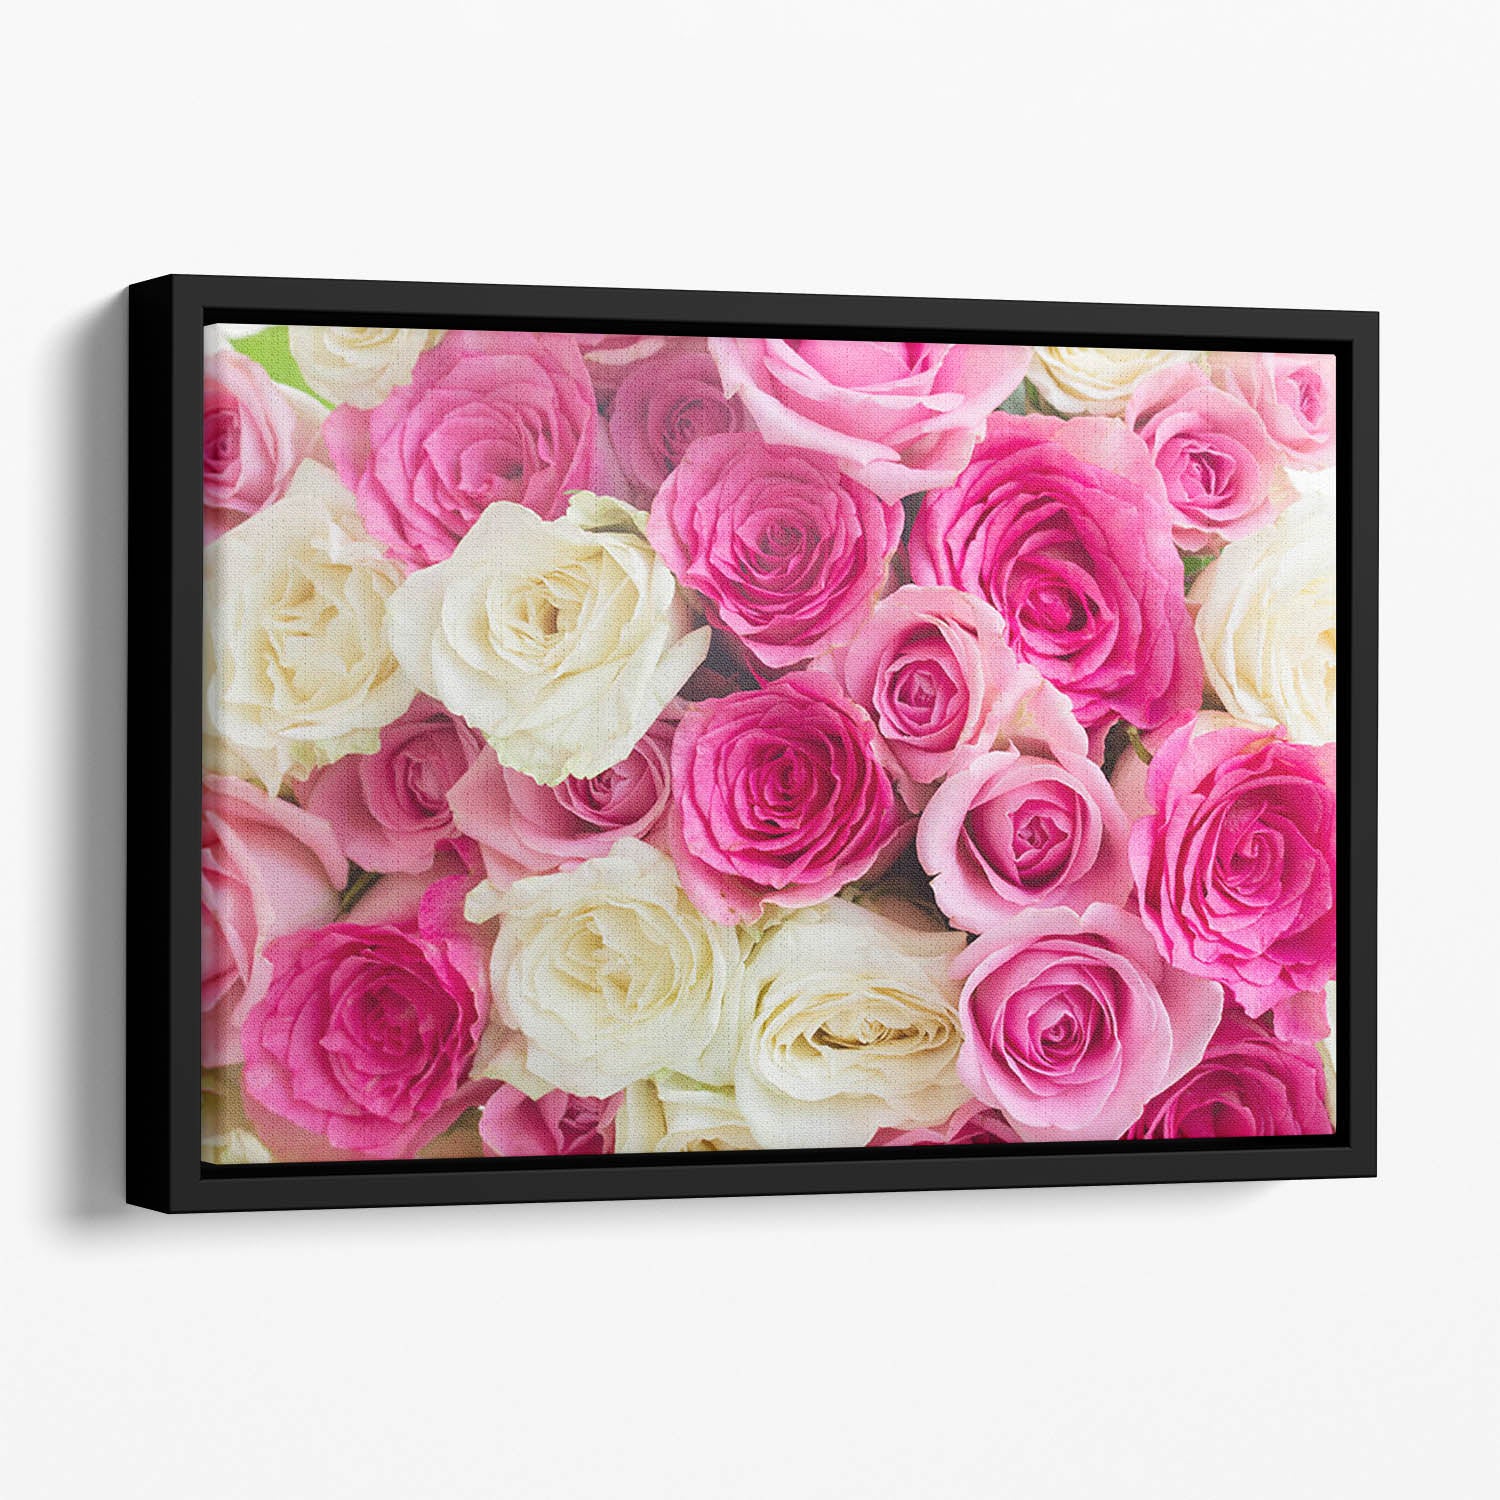 Pink and white fresh rose flowers Floating Framed Canvas